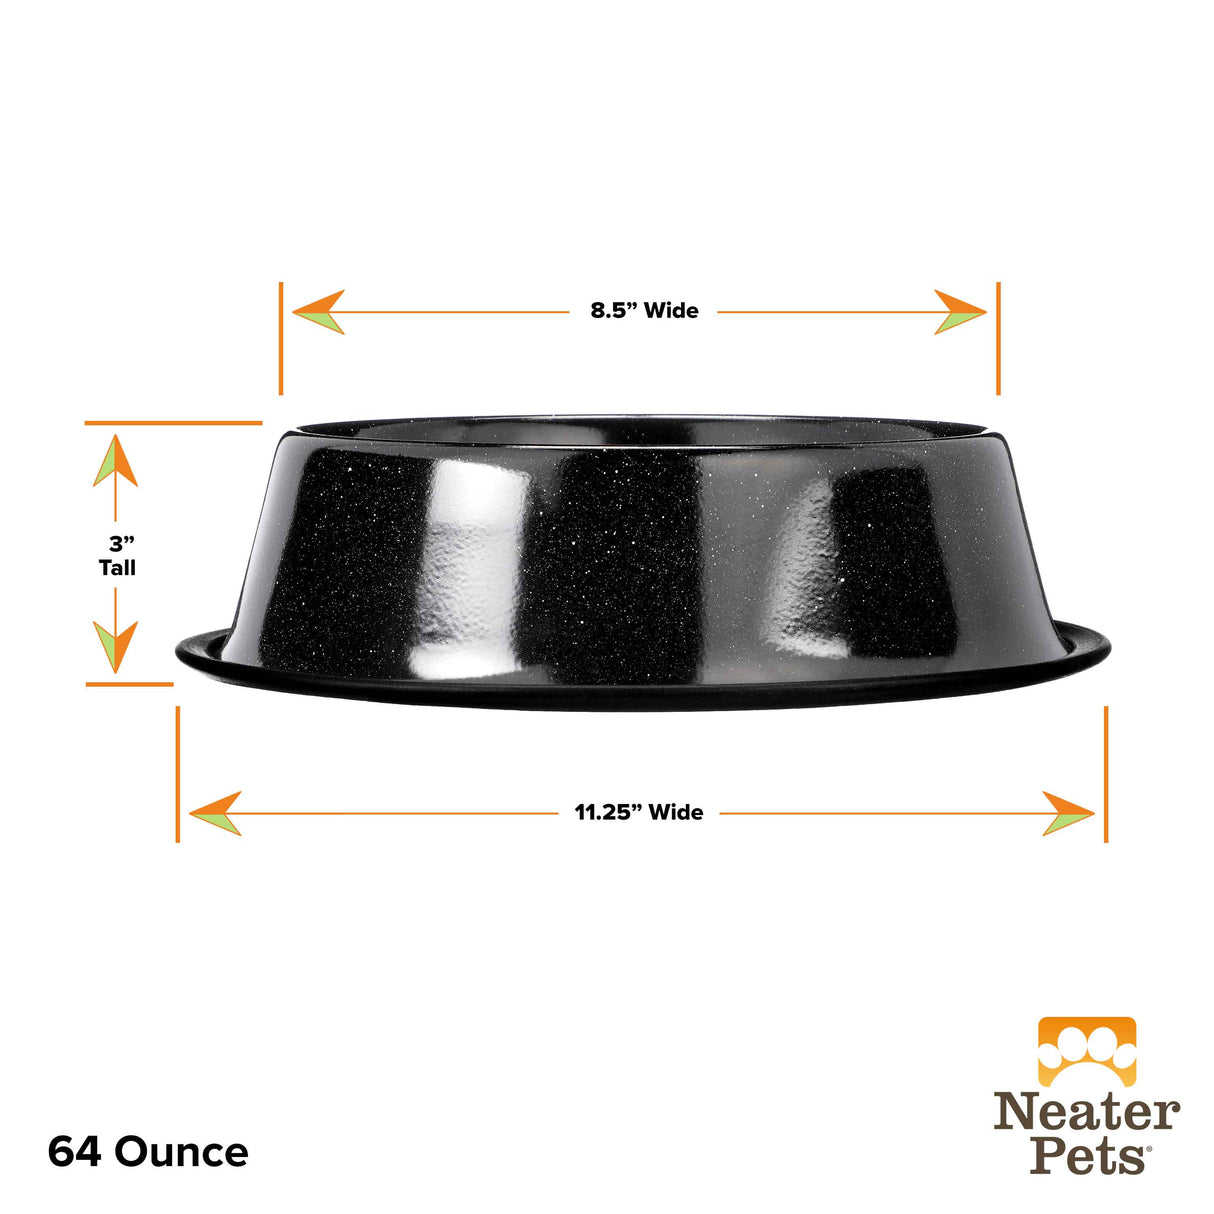 64 ounce Black Camping Bowl sizing guide.